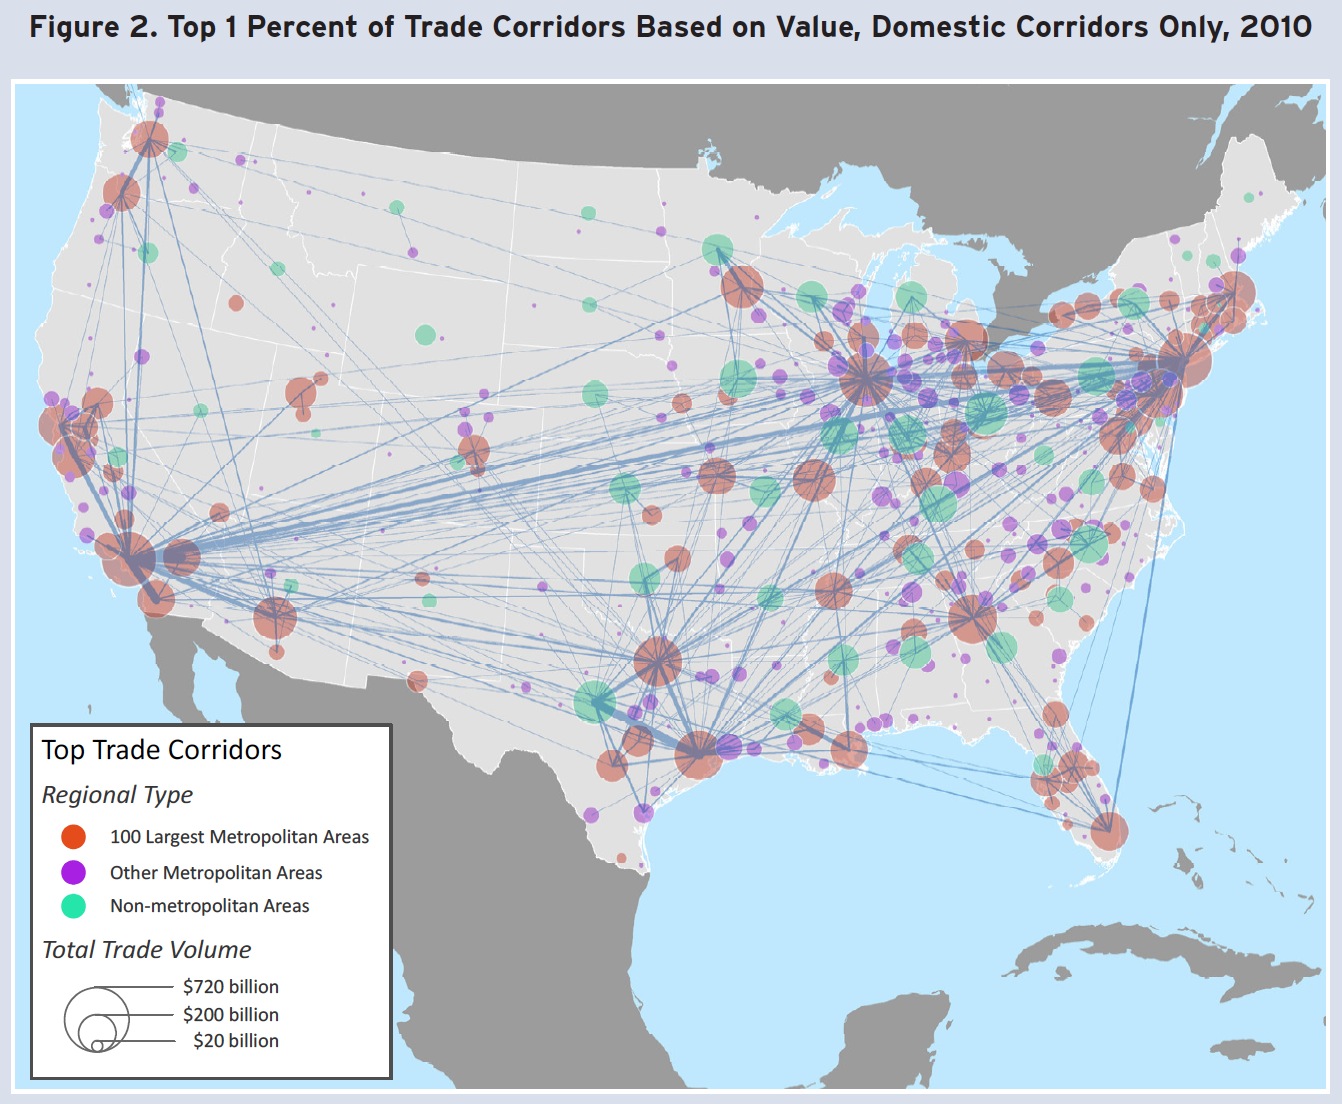 Figure 2. Top 1 Percent of Trade Corridors Based on Value, Domestic Corridors Only, 2010